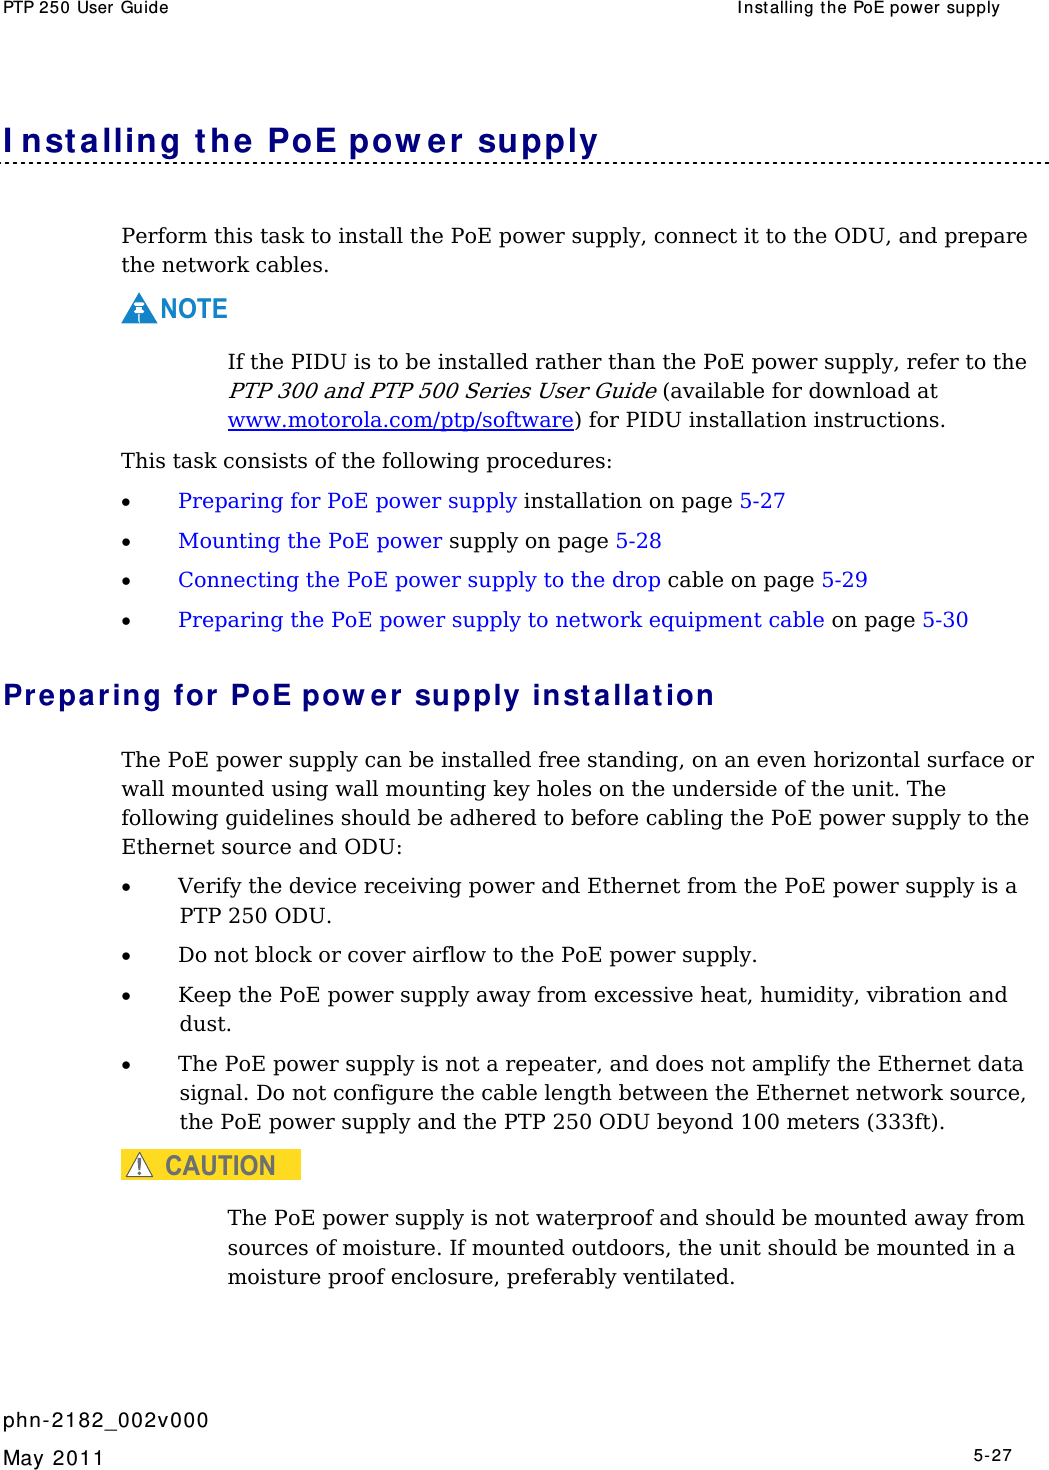 PTP 250 User Guide  I nst alling the PoE power supply   phn- 2182_002v000   May 2011   5-27  I nst alling t he PoE pow er supply Perform this task to install the PoE power supply, connect it to the ODU, and prepare the network cables. NOTE  If the PIDU is to be installed rather than the PoE power supply, refer to the PTP 300 and PTP 500 Series User Guide (available for download at www.motorola.com/ptp/software) for PIDU installation instructions. This task consists of the following procedures: • Preparing for PoE power supply installation on page 5-27 • Mounting the PoE power supply on page 5-28 • Connecting the PoE power supply to the drop cable on page 5-29 • Preparing the PoE power supply to network equipment cable on page 5-30 Preparing for PoE pow er supply insta lla t ion The PoE power supply can be installed free standing, on an even horizontal surface or wall mounted using wall mounting key holes on the underside of the unit. The following guidelines should be adhered to before cabling the PoE power supply to the Ethernet source and ODU: • Verify the device receiving power and Ethernet from the PoE power supply is a PTP 250 ODU. • Do not block or cover airflow to the PoE power supply. • Keep the PoE power supply away from excessive heat, humidity, vibration and dust. • The PoE power supply is not a repeater, and does not amplify the Ethernet data signal. Do not configure the cable length between the Ethernet network source, the PoE power supply and the PTP 250 ODU beyond 100 meters (333ft). CAUTION  The PoE power supply is not waterproof and should be mounted away from sources of moisture. If mounted outdoors, the unit should be mounted in a moisture proof enclosure, preferably ventilated. 